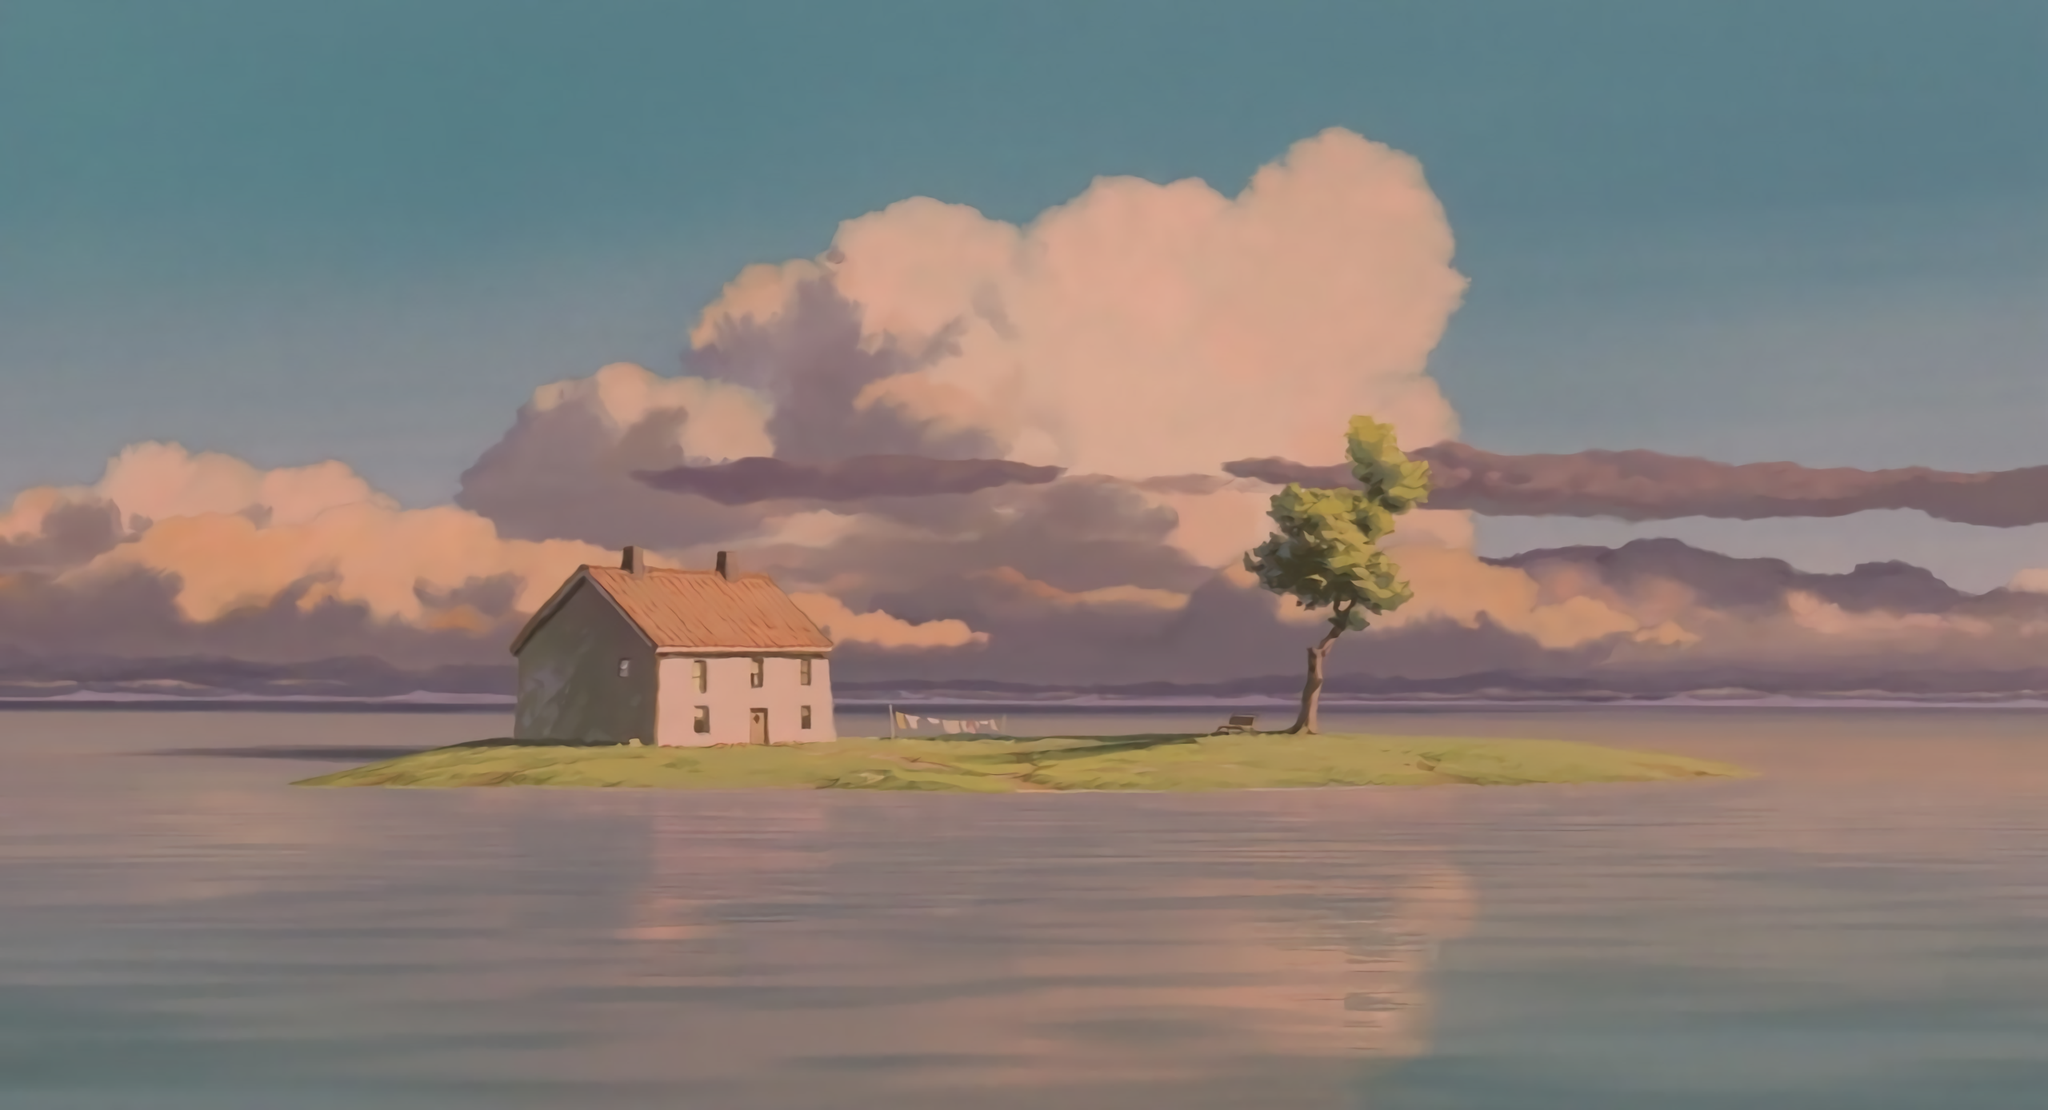 Some HD wallpapers from Spirited Away's train scene. Pure serenity ...